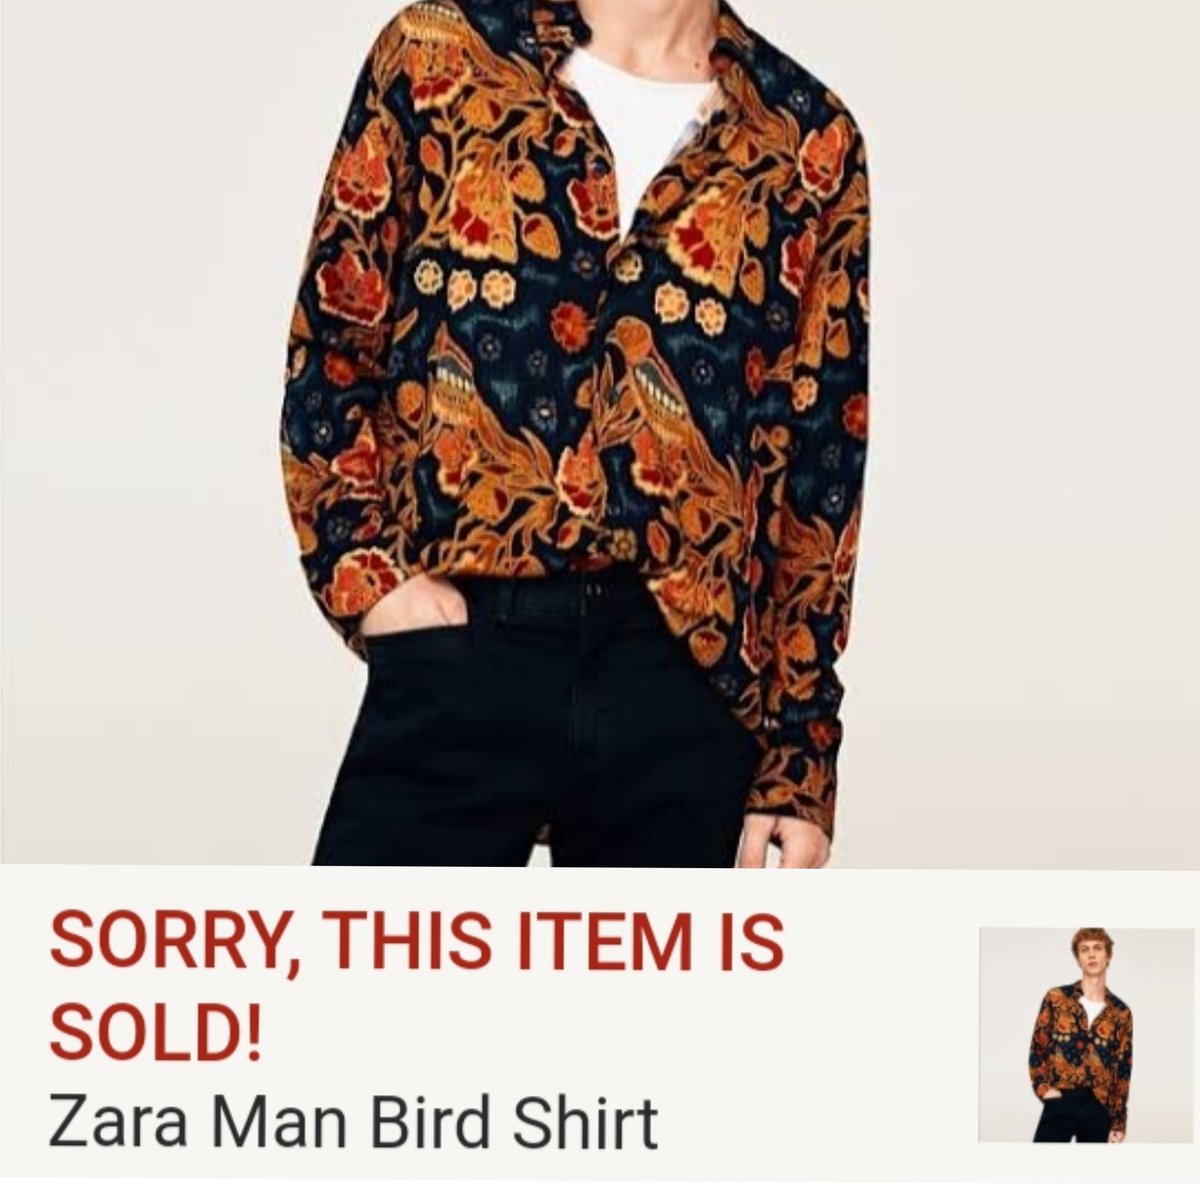 TAE♡Vbear⁷⁹ LAYO(ꪜ)ER🐅 on X: "Our Kim Taehyung worn " Zara bird printed  shirt" 🐯🐦❣️[$49] in his Twitter background prf which he previously wore  too in 2019 bdy live!! &look what "Shirt is